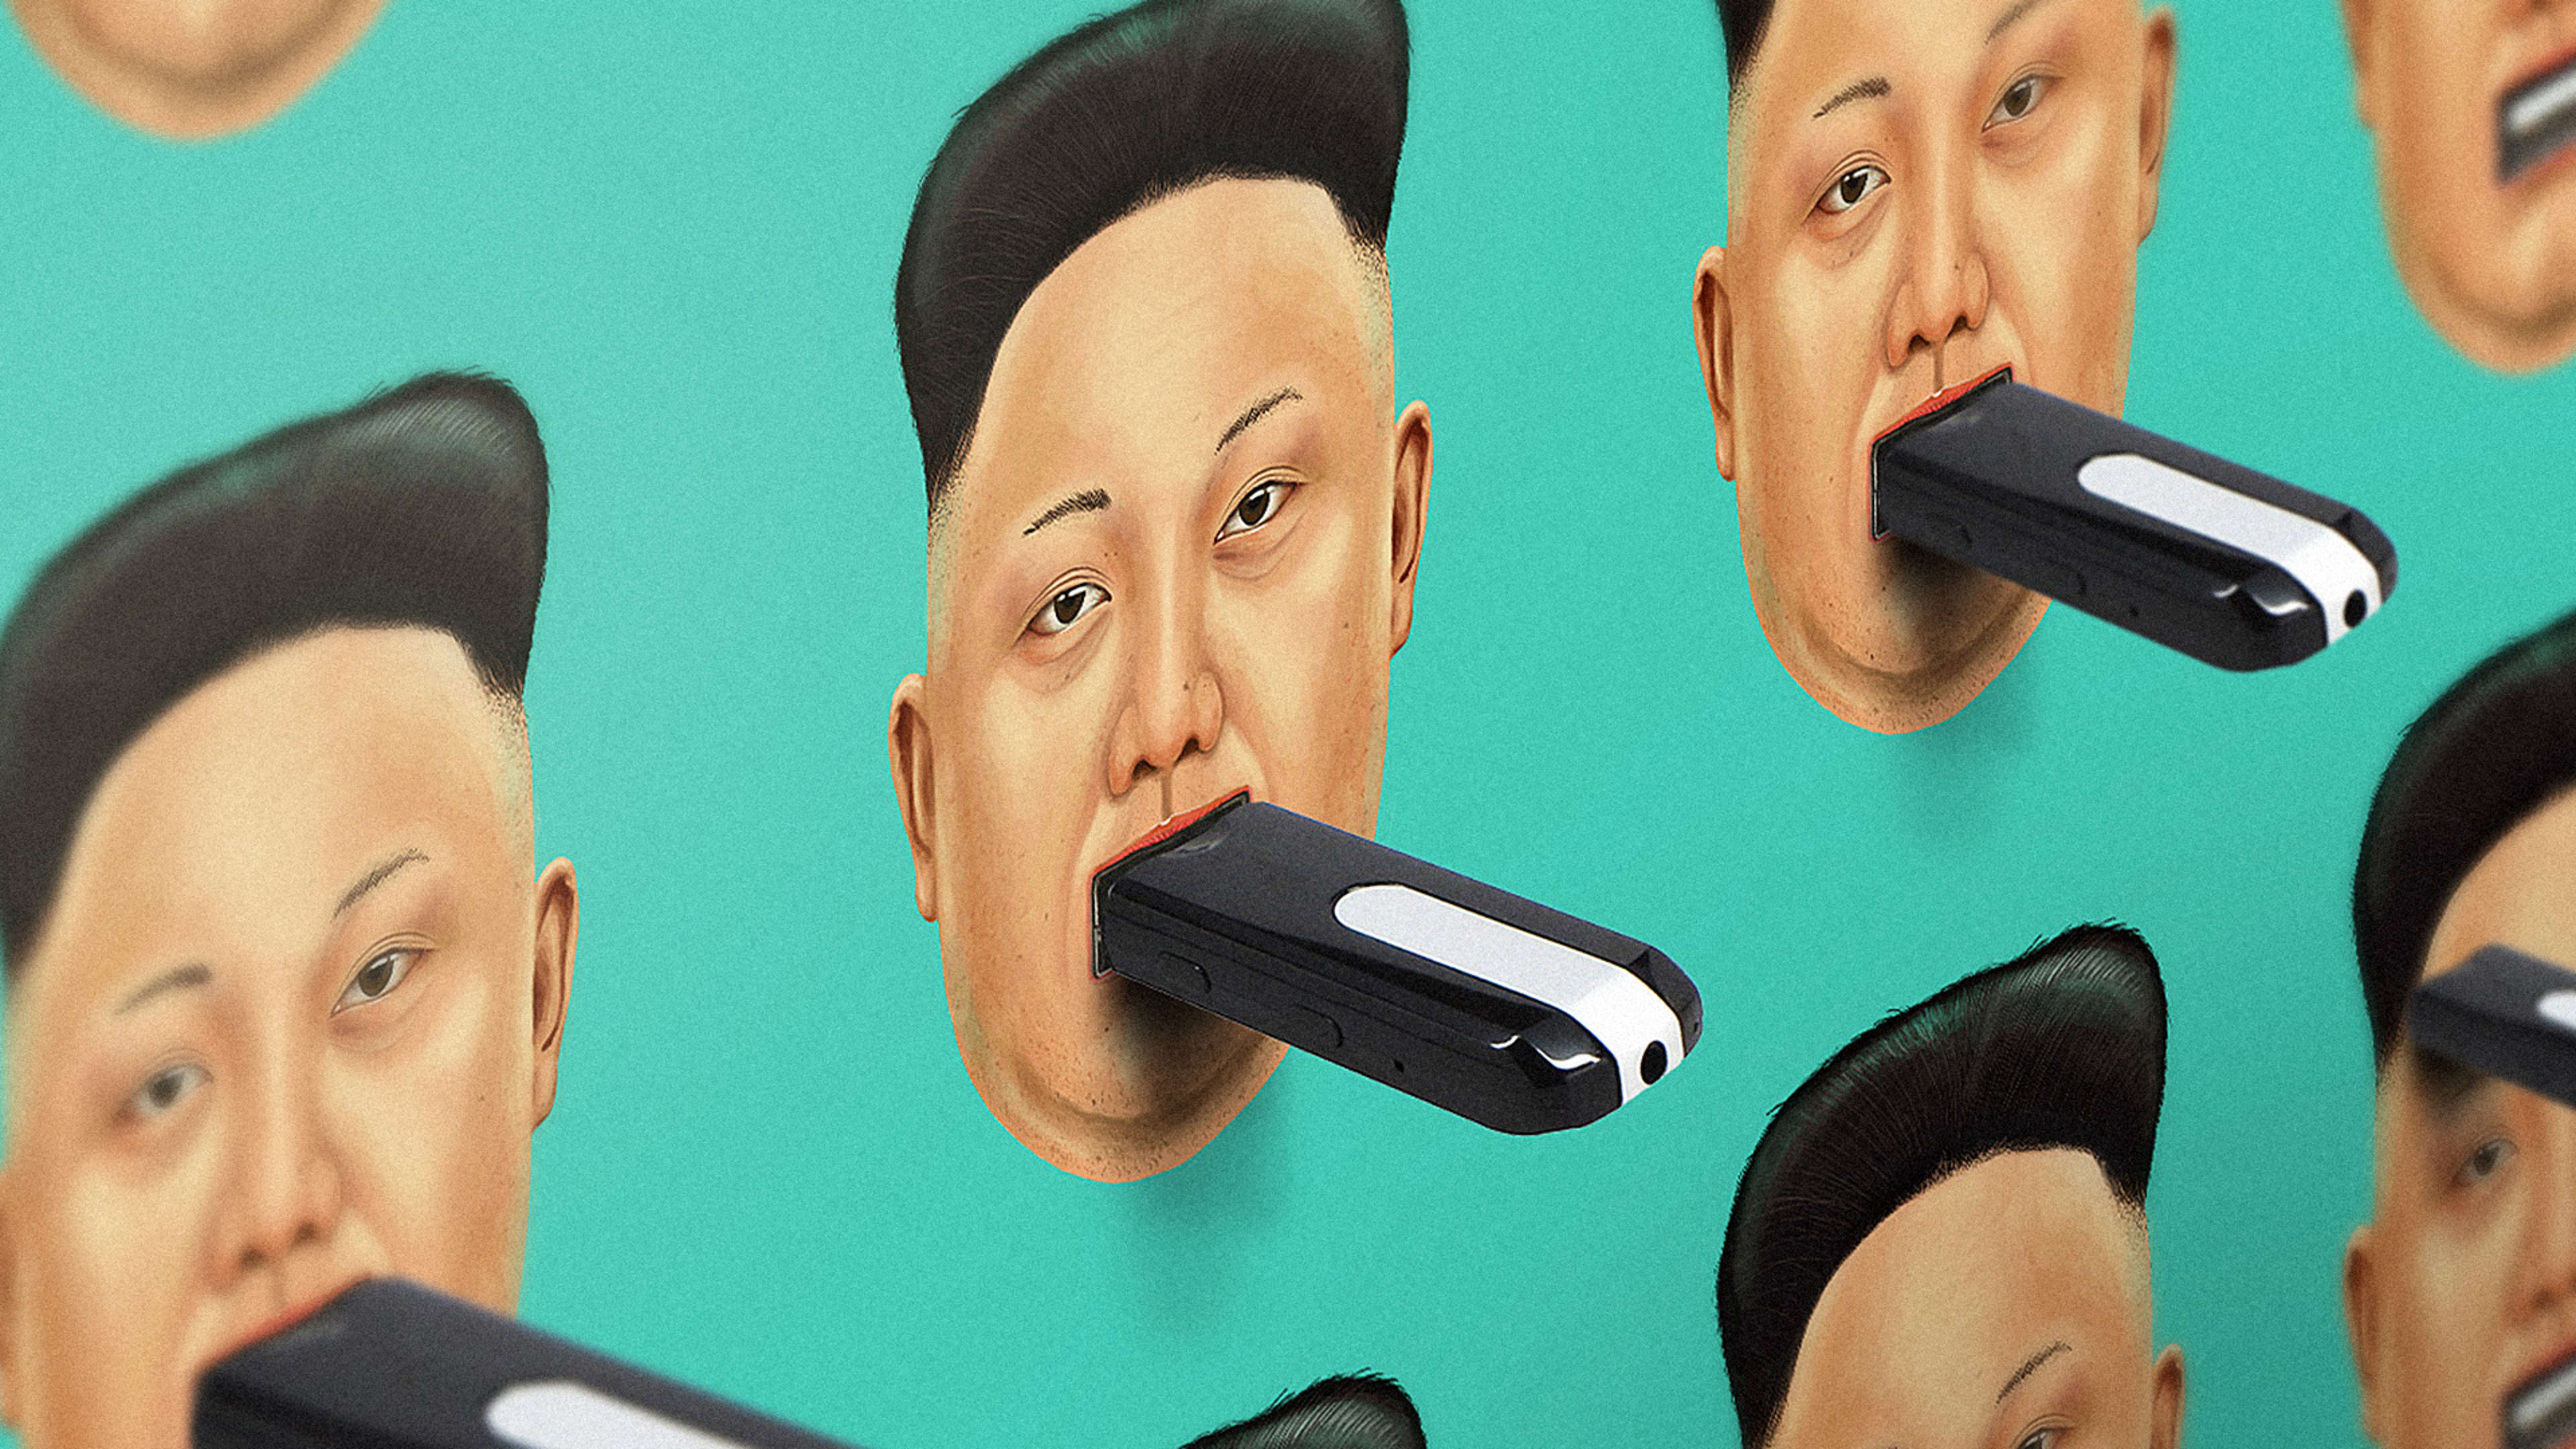 The Dangerous Mission To Undermine North Korea With Flash Drives